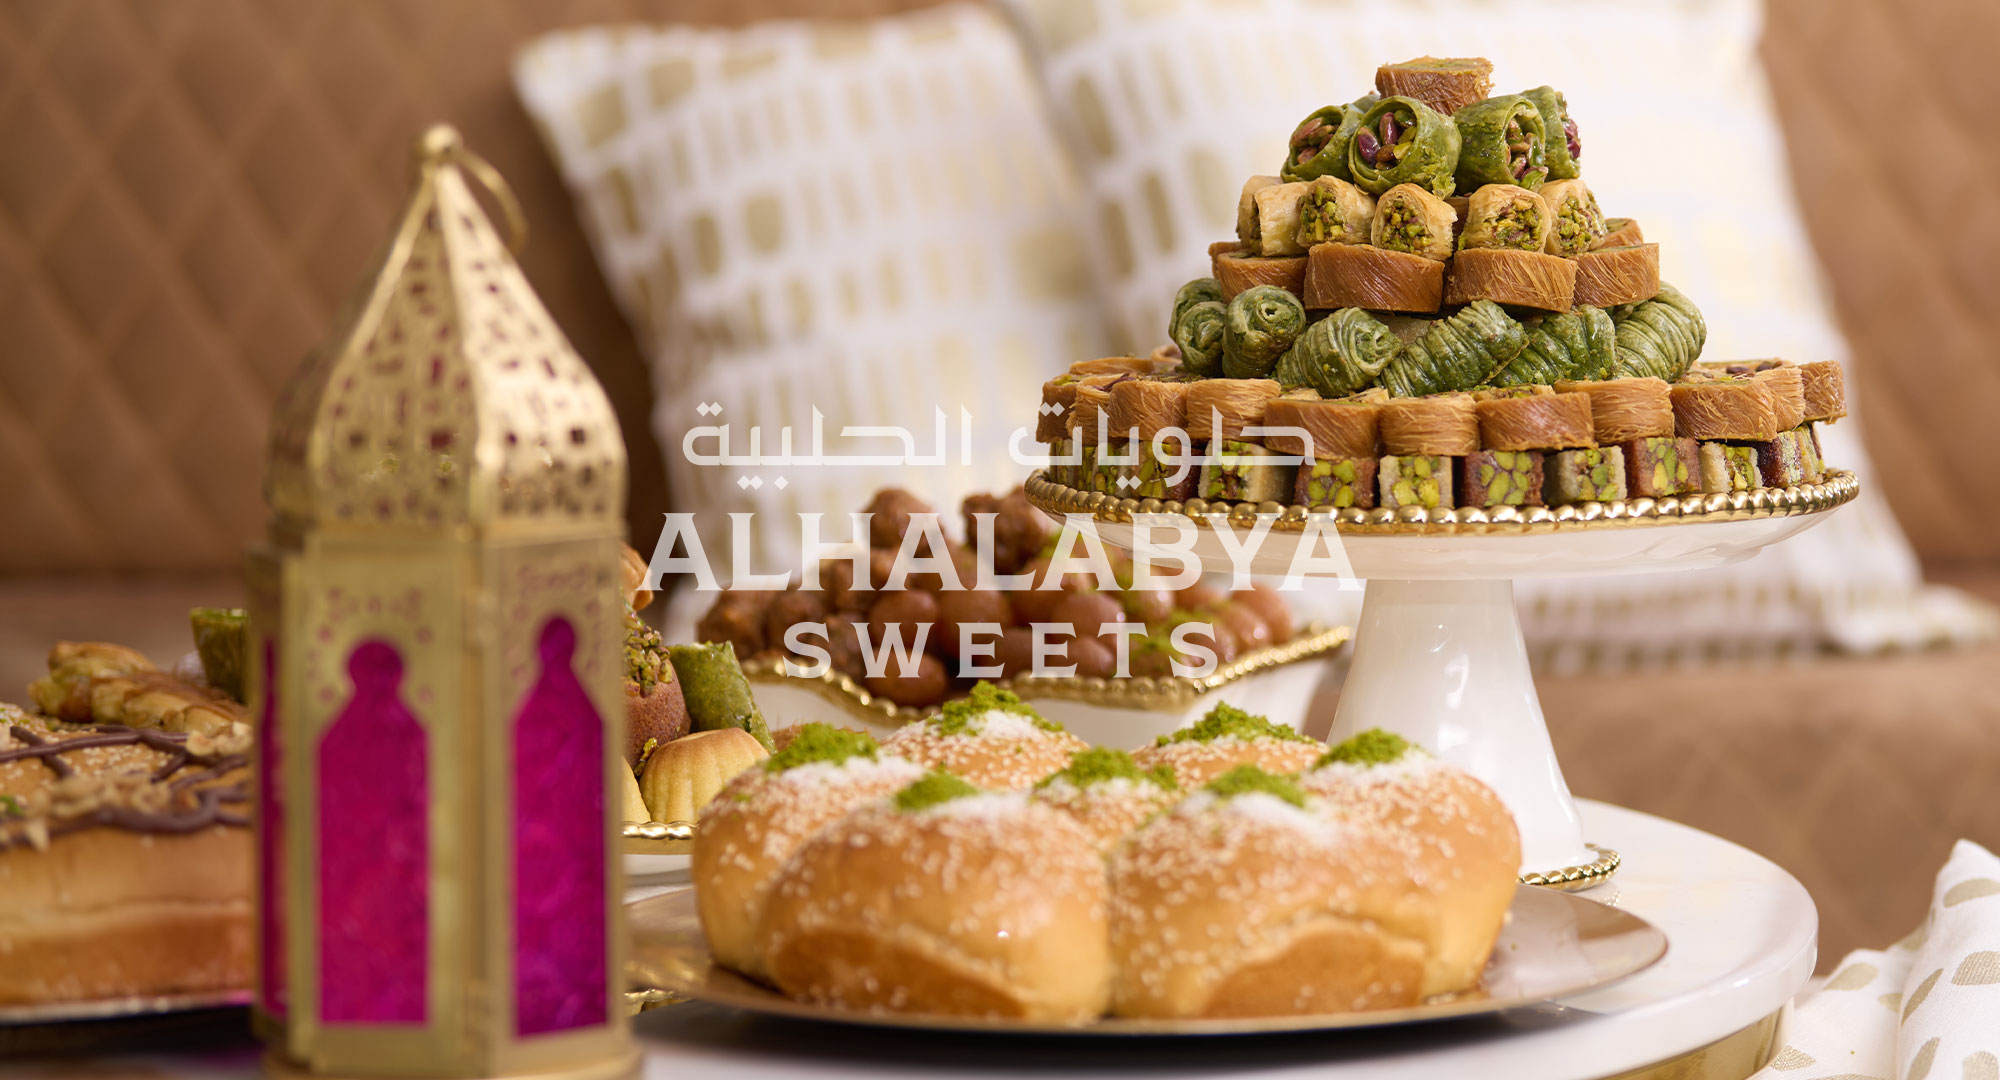 Celebrating Special Occasions with Al Halabya Sweets